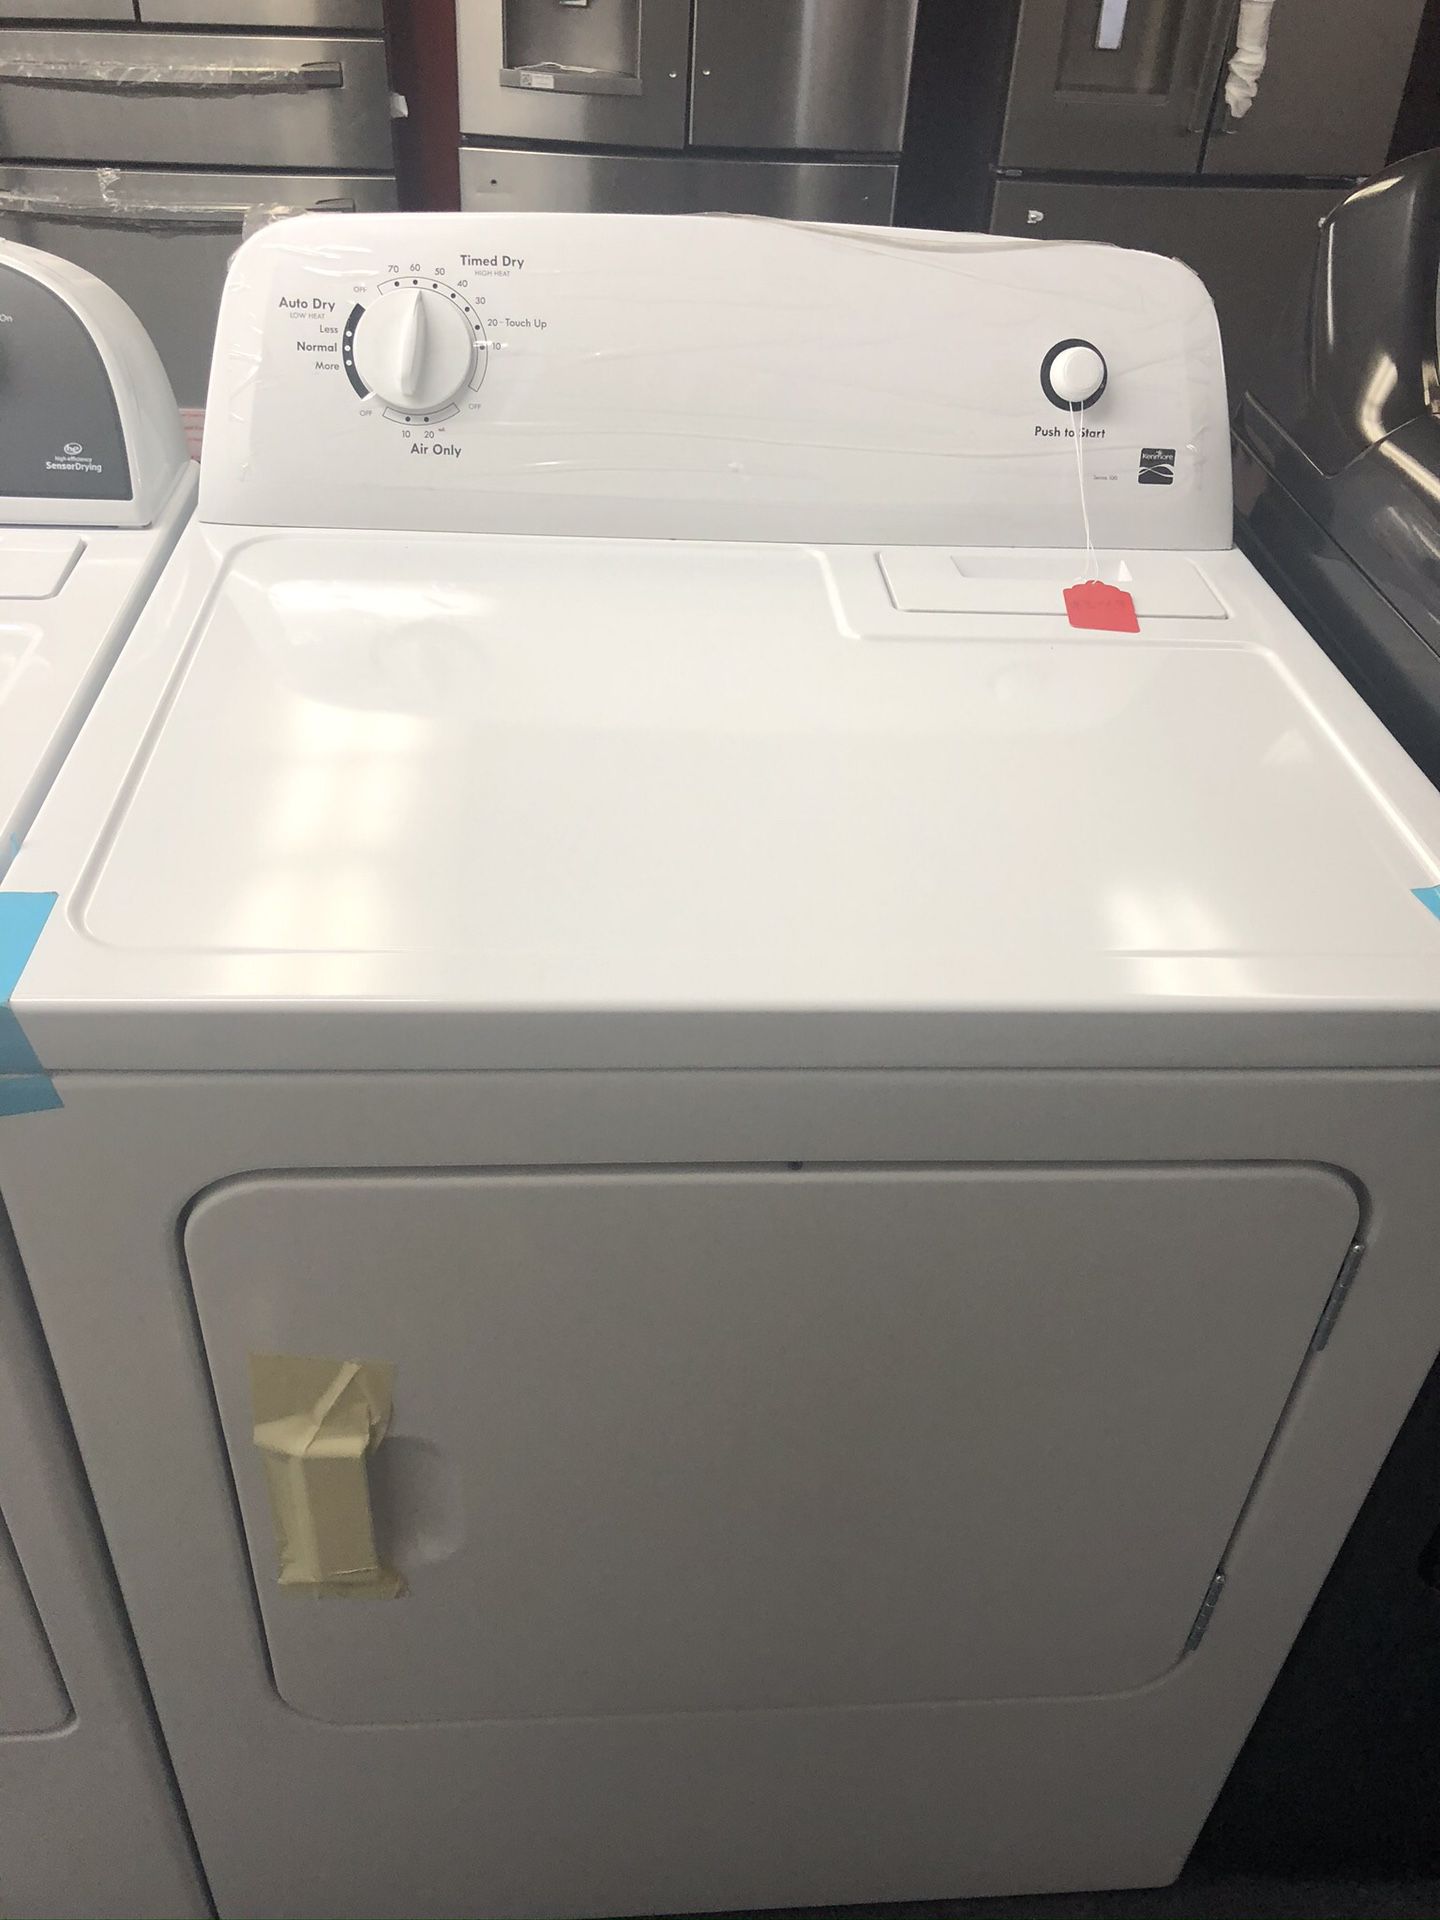 New scratch and dent kenmore dryer. 1 year warranty